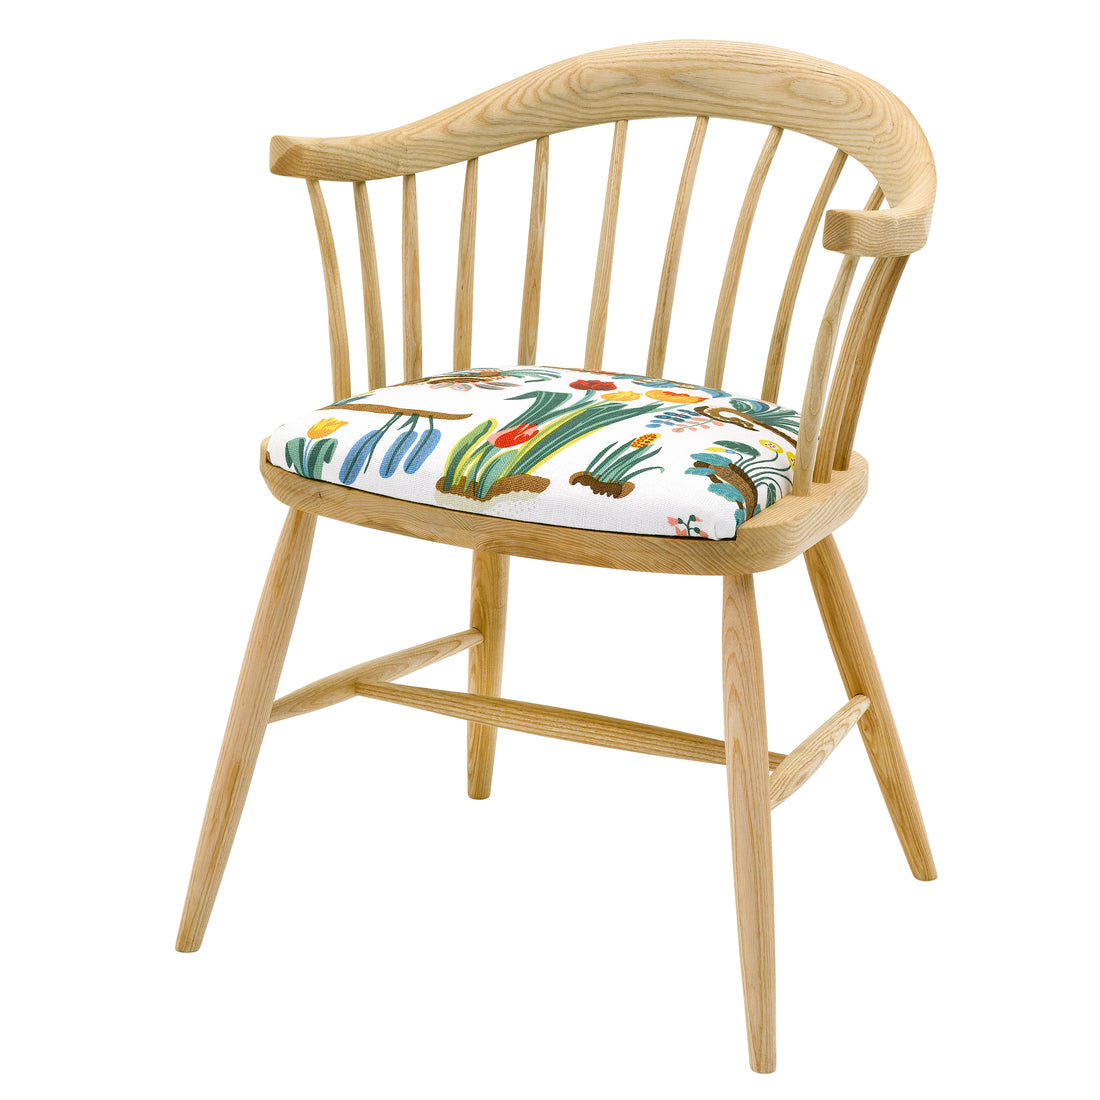 The Origin of Modern Windsor Chairs: A Tale of Tradition and Innovation